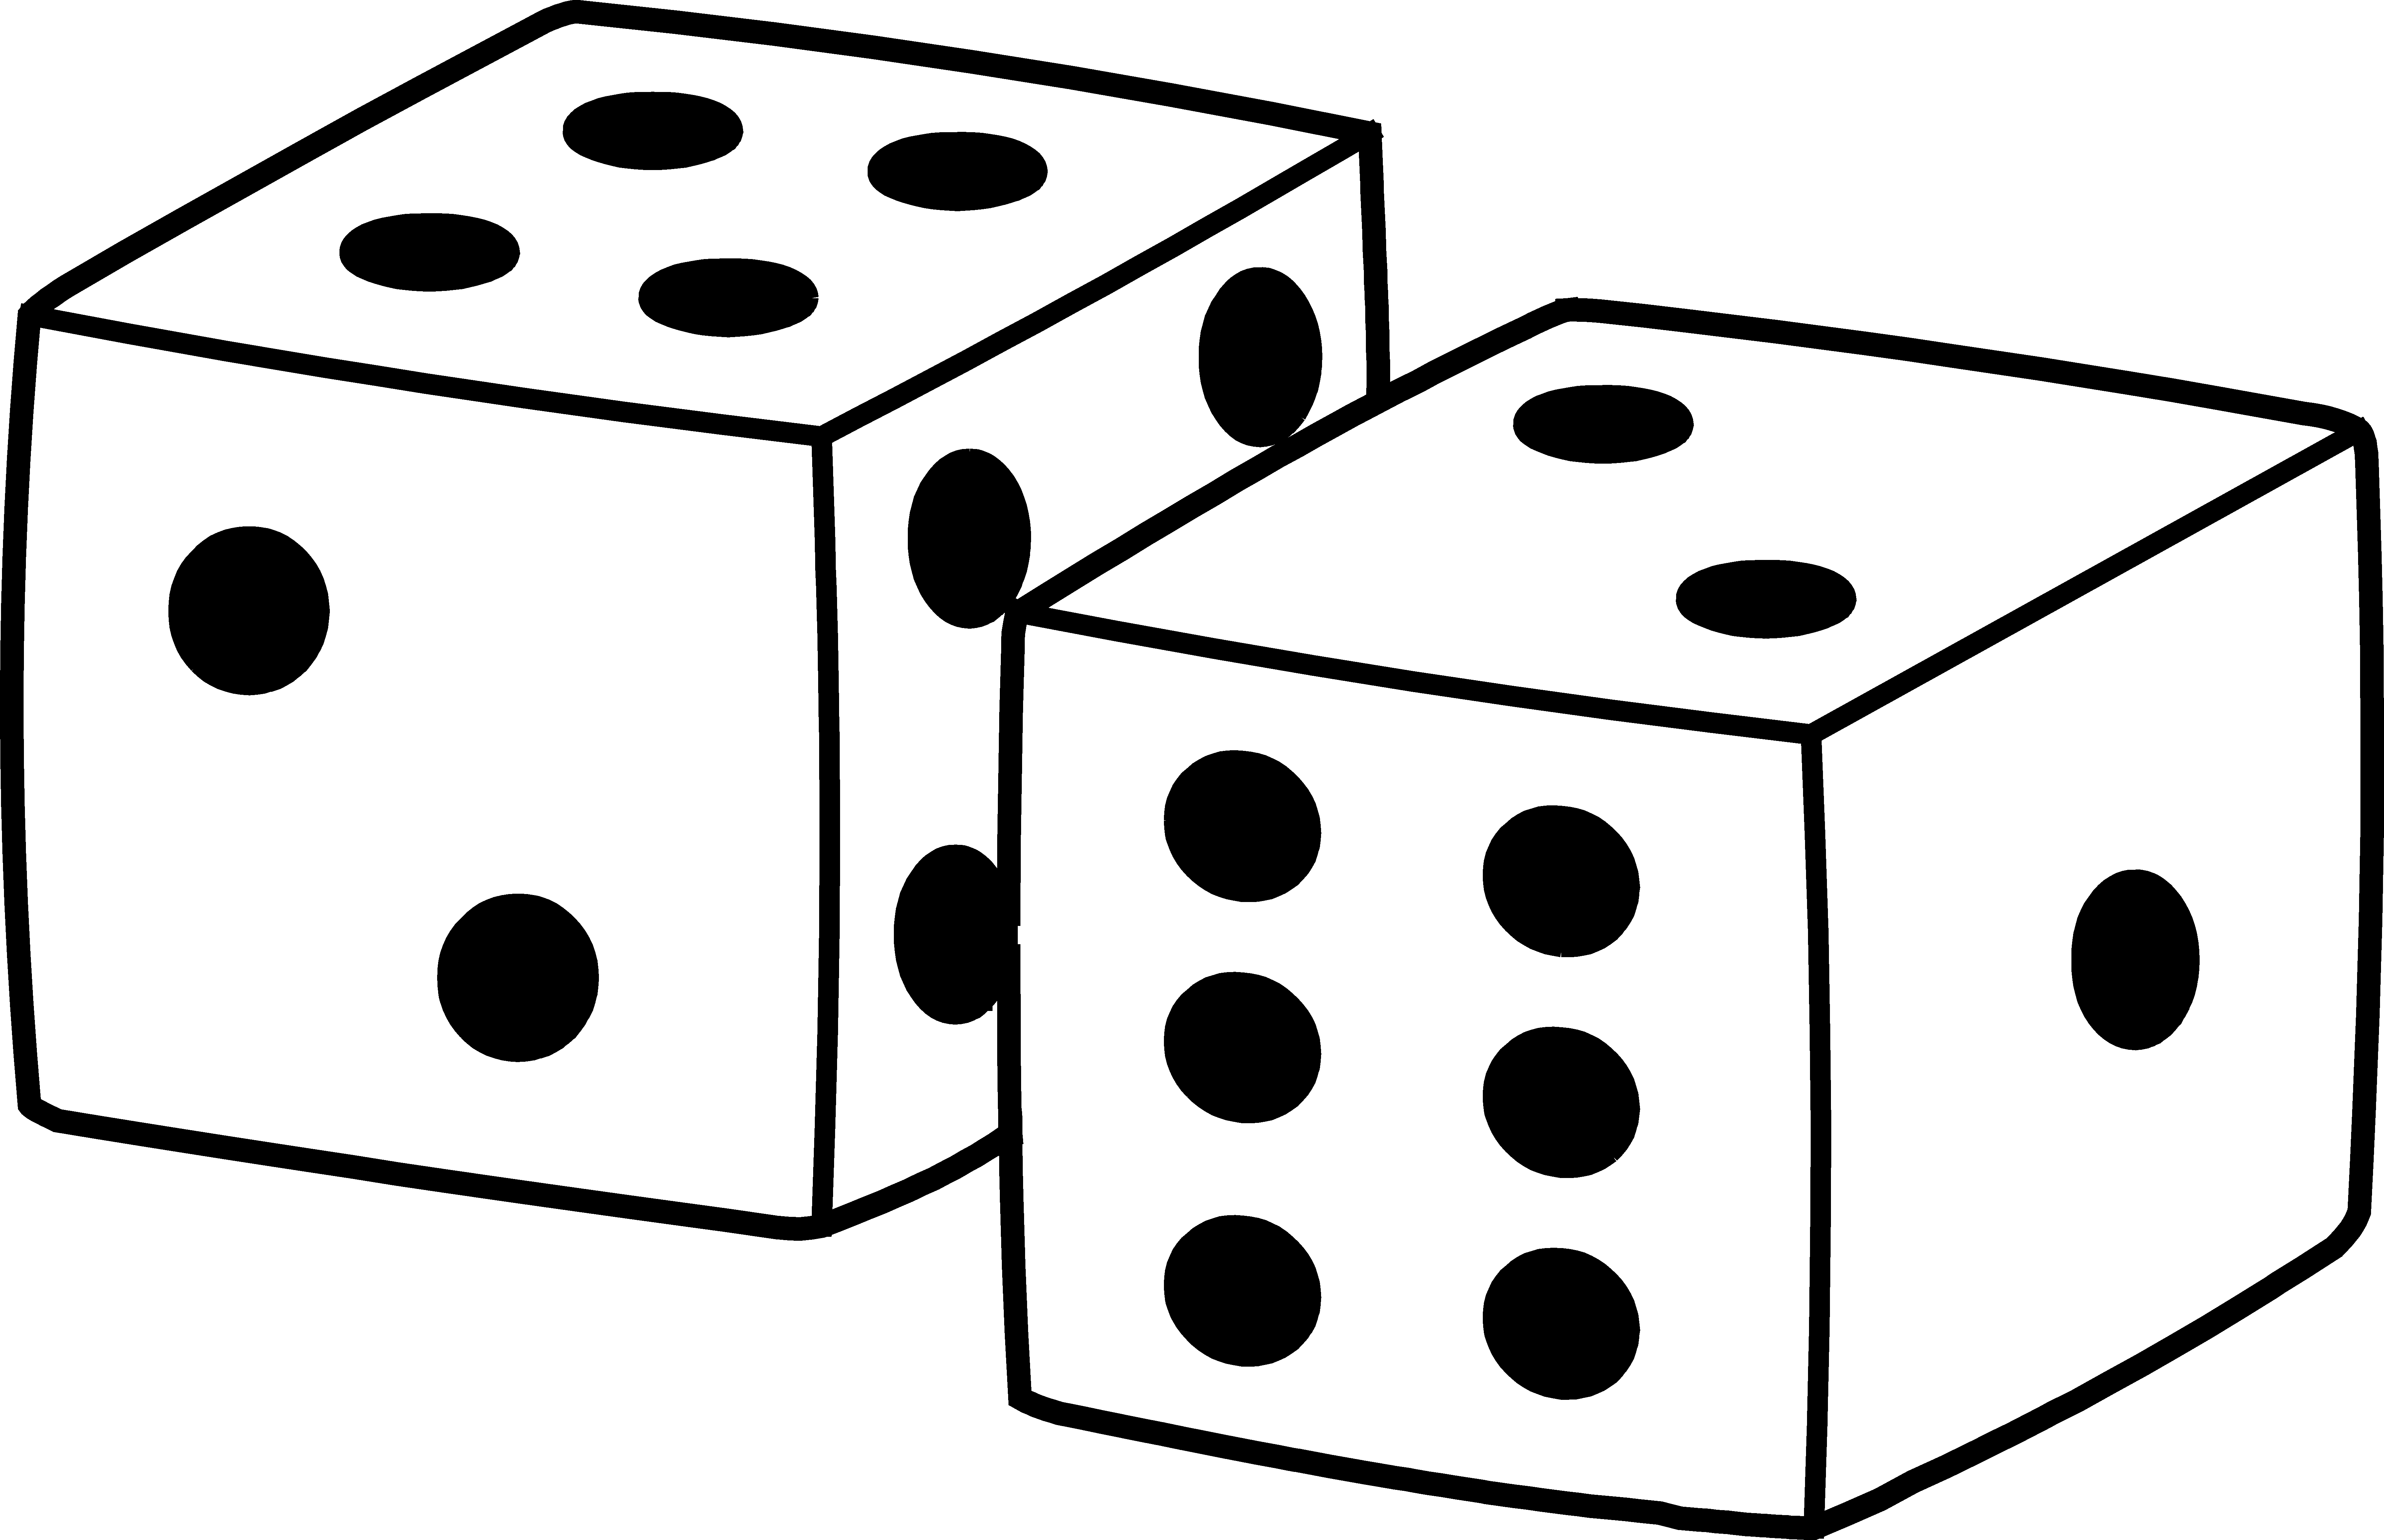 Simple Playing Dice Design - Free Clip Art